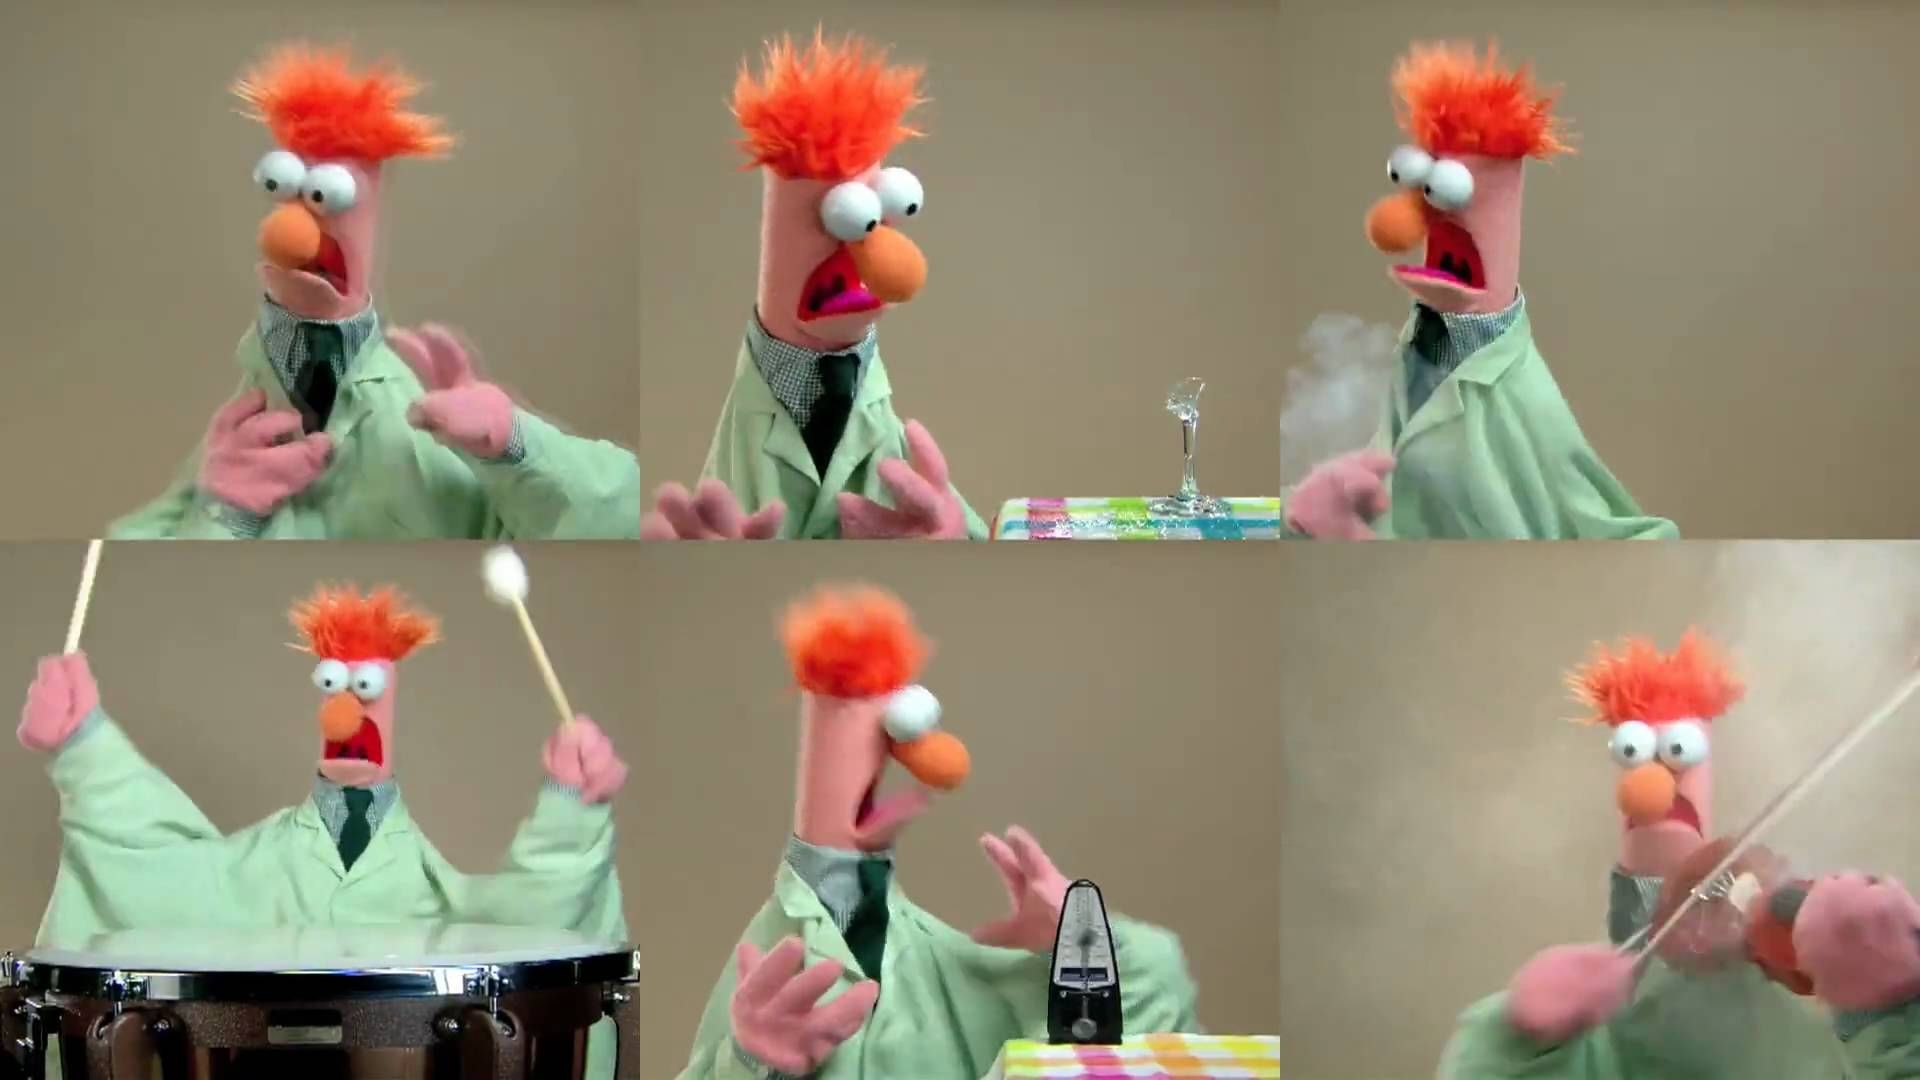 1920x1080 The Muppets: Ode To Joy